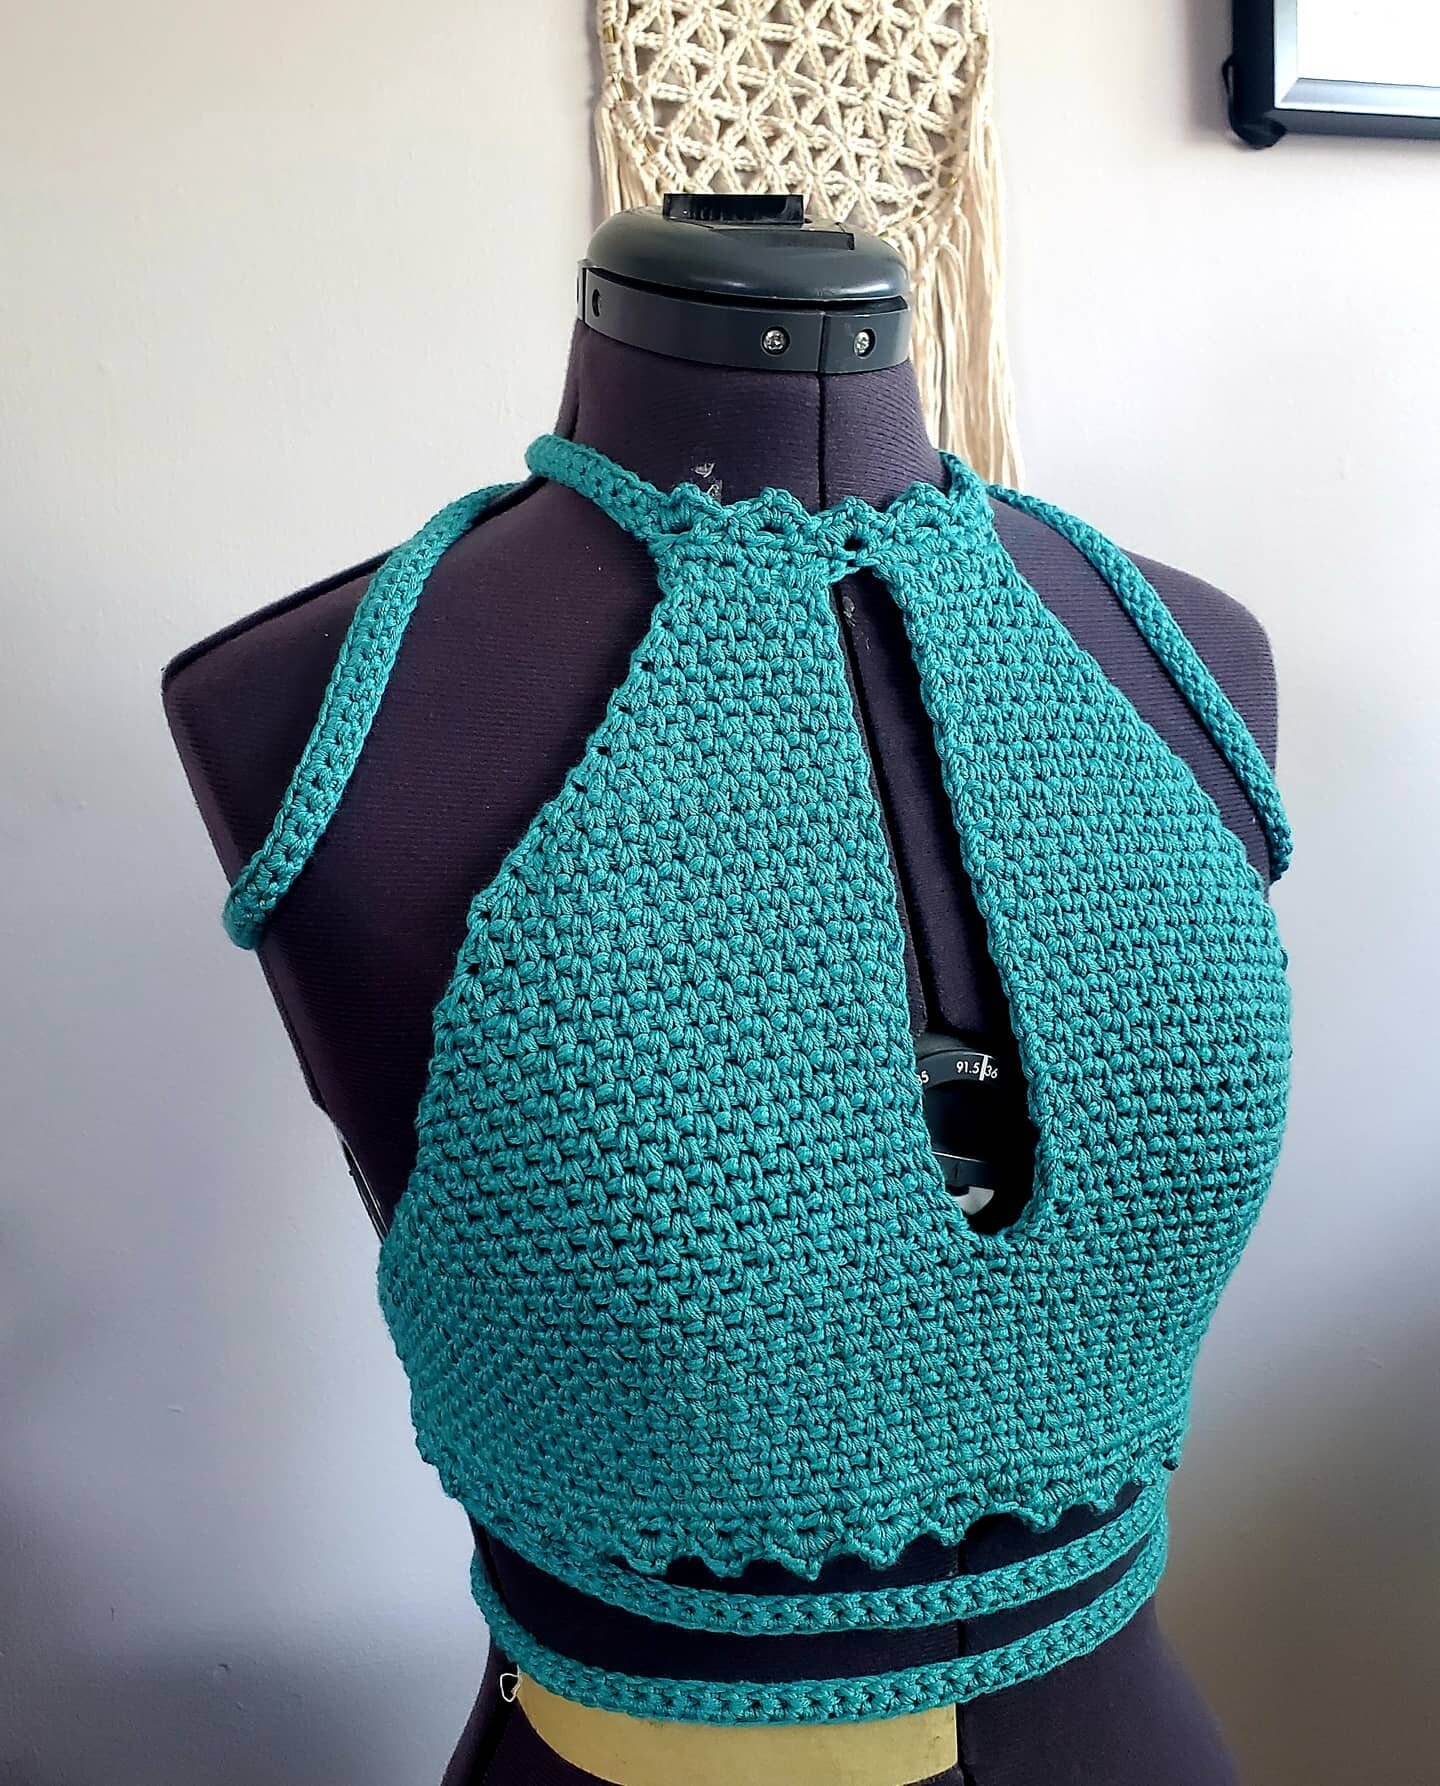 Summer crop season is fast approaching. 
What will you be making?

Pattern: this was a custom Althea top with a different border and extra long straps.

#yarnlove #yarnpunk #yarnwitch #makerlife #makersgonnamake #etsyseller #etsy #etsyshop #makersofi